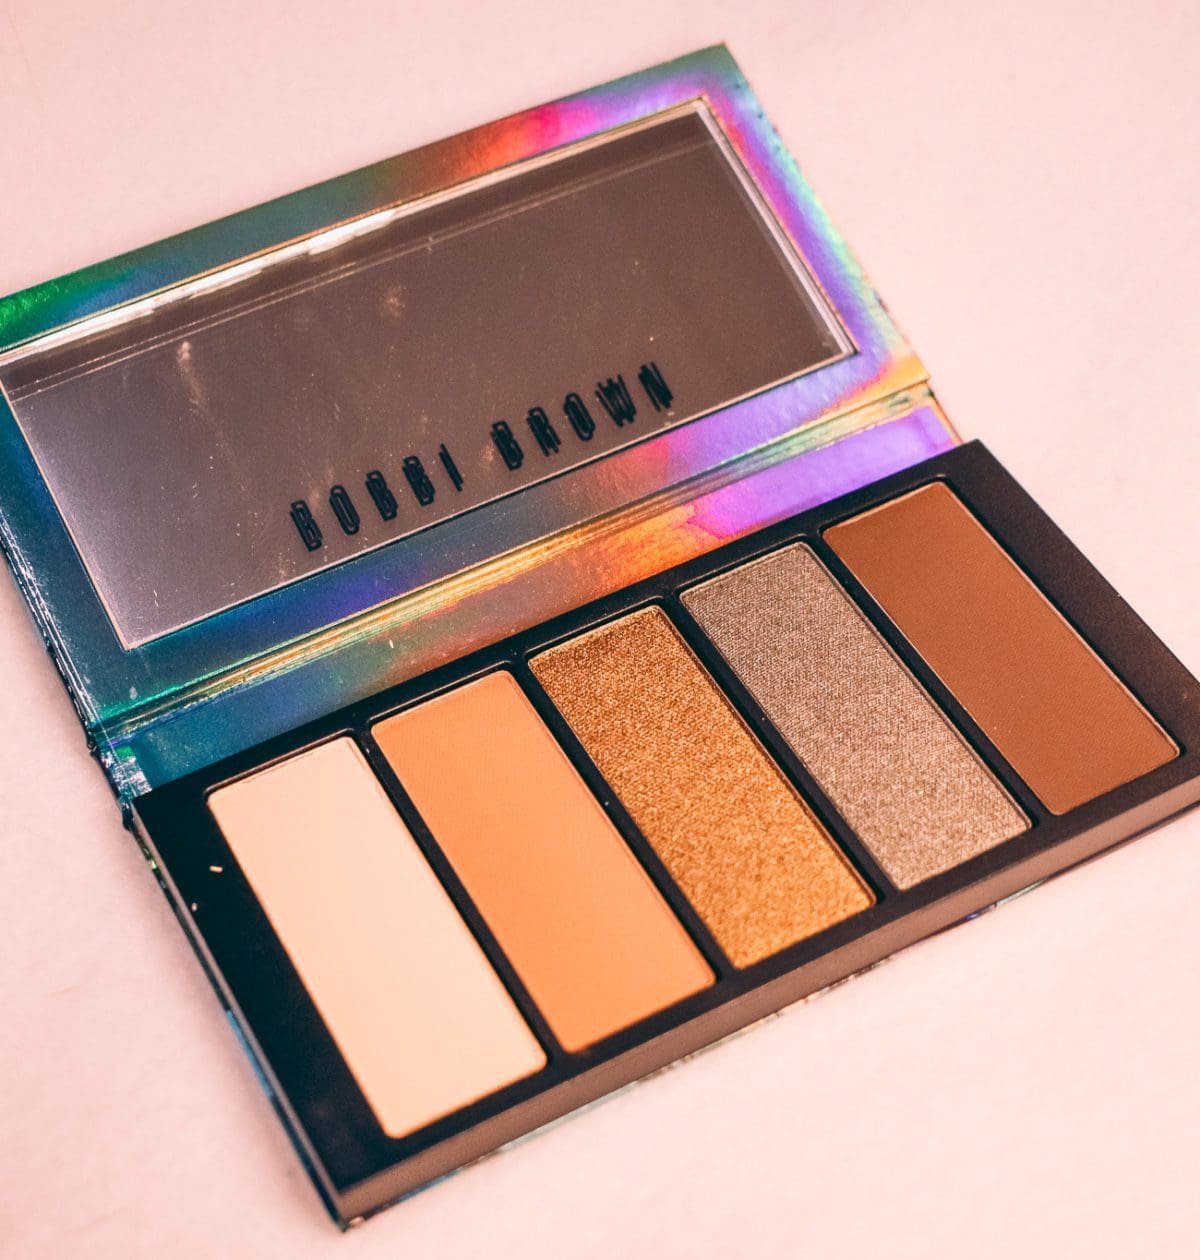 I'm loving Bobbi Brown's Autumn Avenue Eyeshadow Palette. This eyeshadow palette is a great deal and only available at Bloomingdale's. Get the details here!